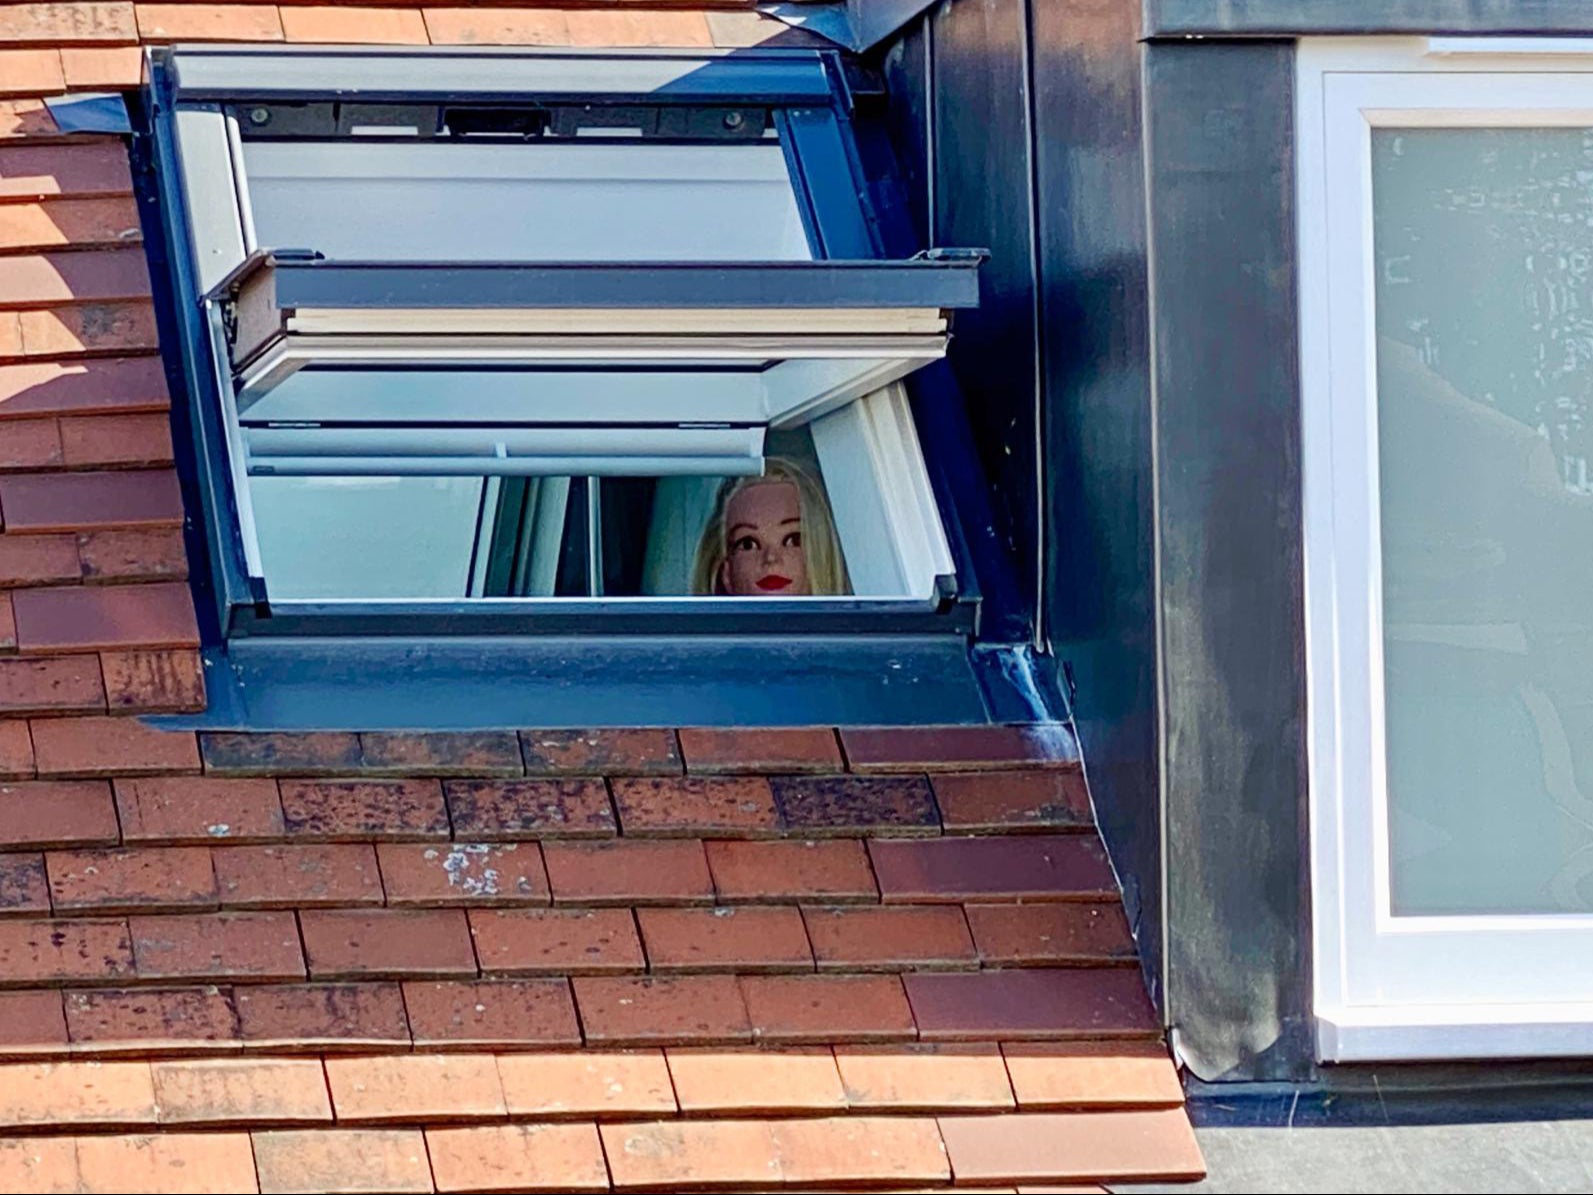 The pair claimed a blonde-haired mannequin placed in their neighbour’s window purposely overlooked their Richmond Park home